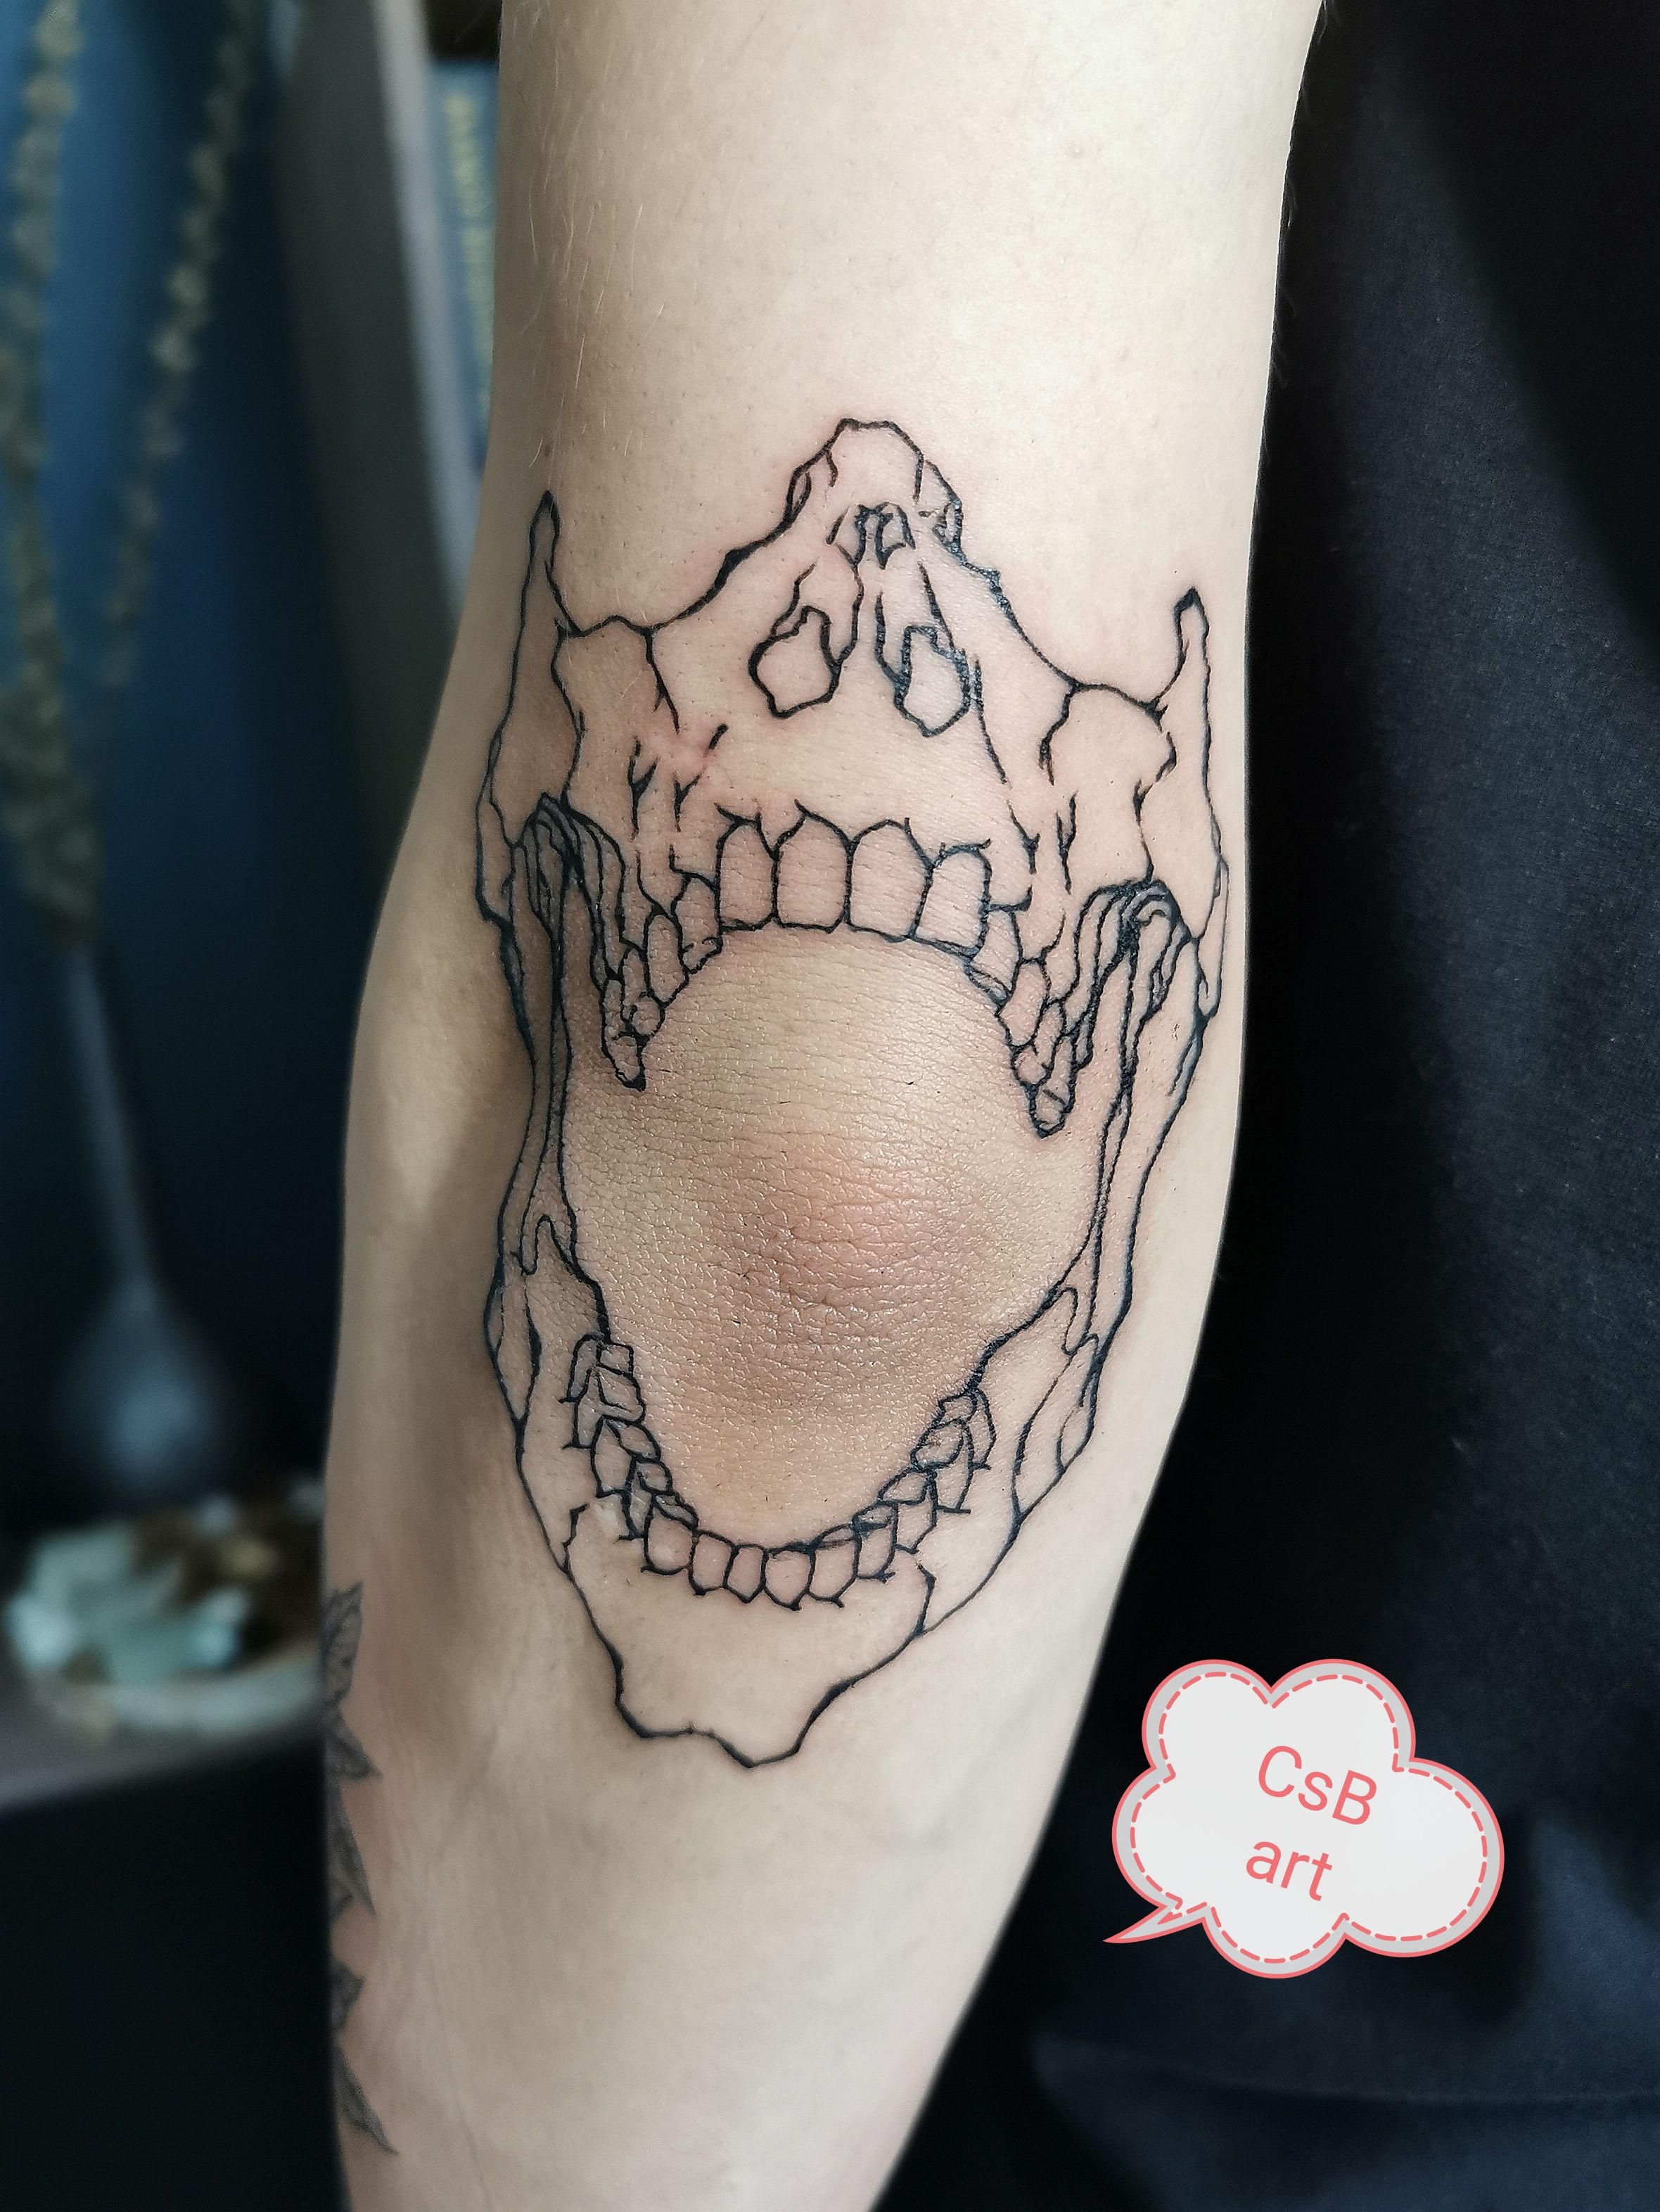 Elbow skull jammer ouchie Work  The Tattoo Shoppe  Facebook